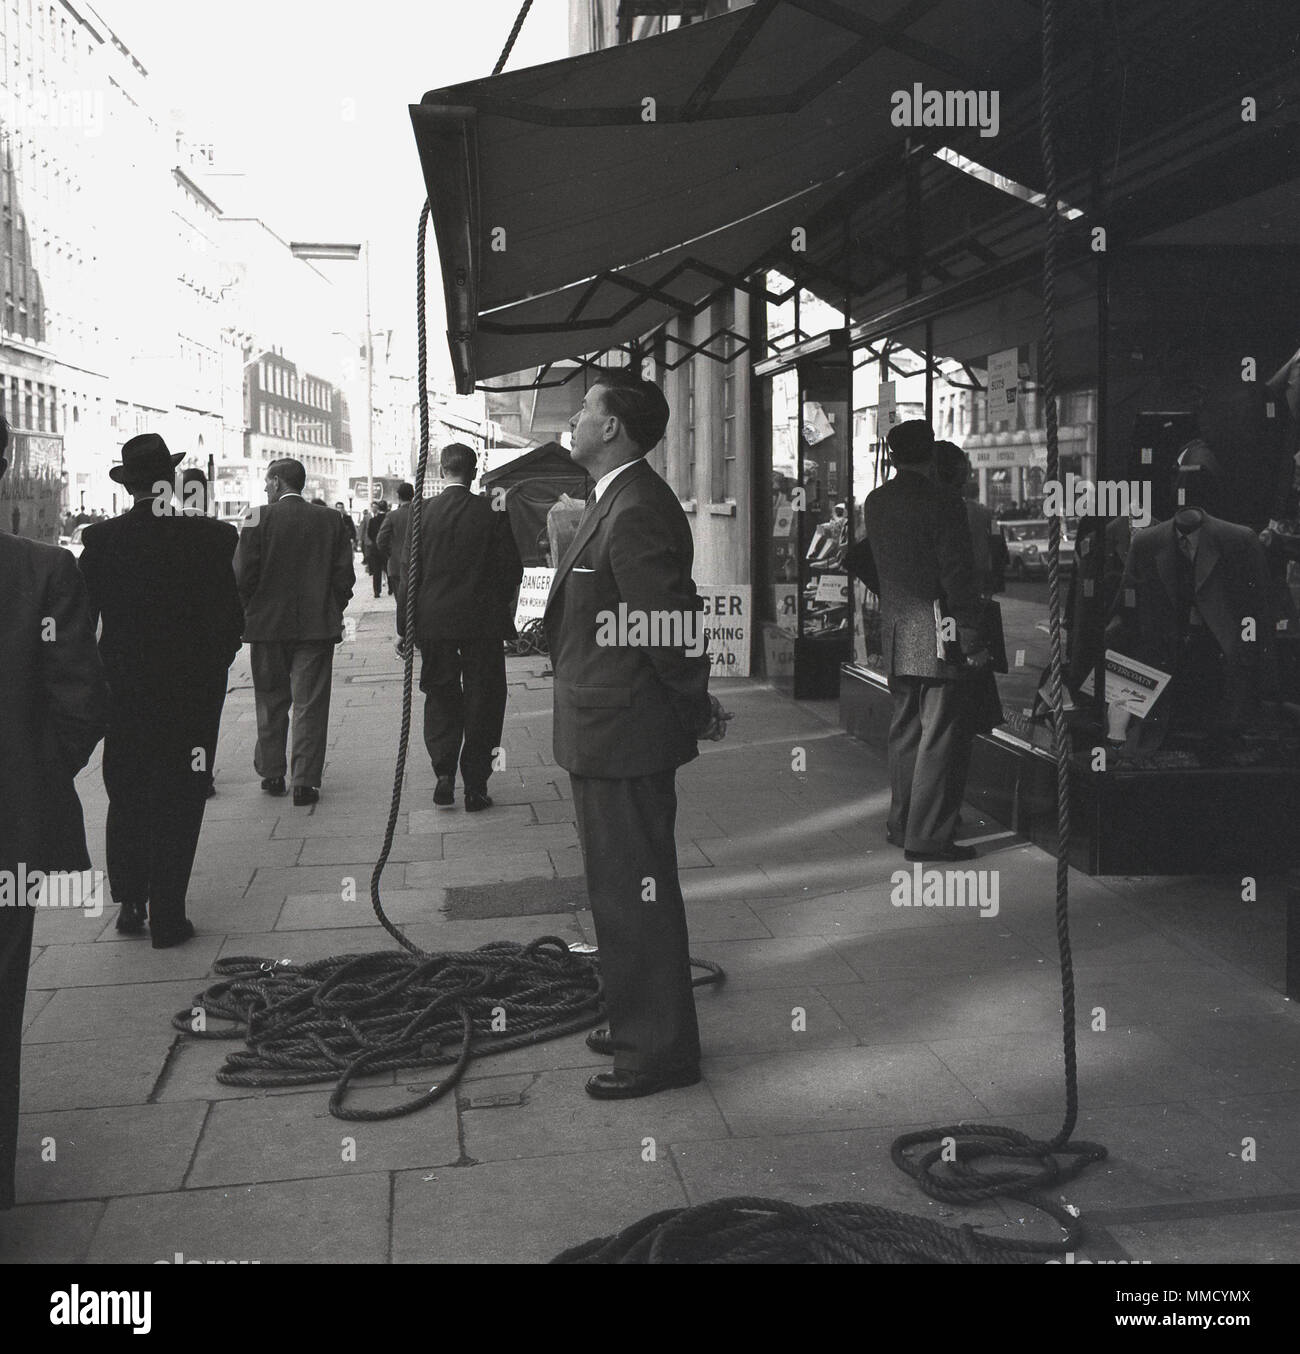 London, 1961, The Strand and a gentleman standing on the wide pavement in the shade underneath a shop's canopy or awning with rope lying on the ground indicating building work above. Stock Photo